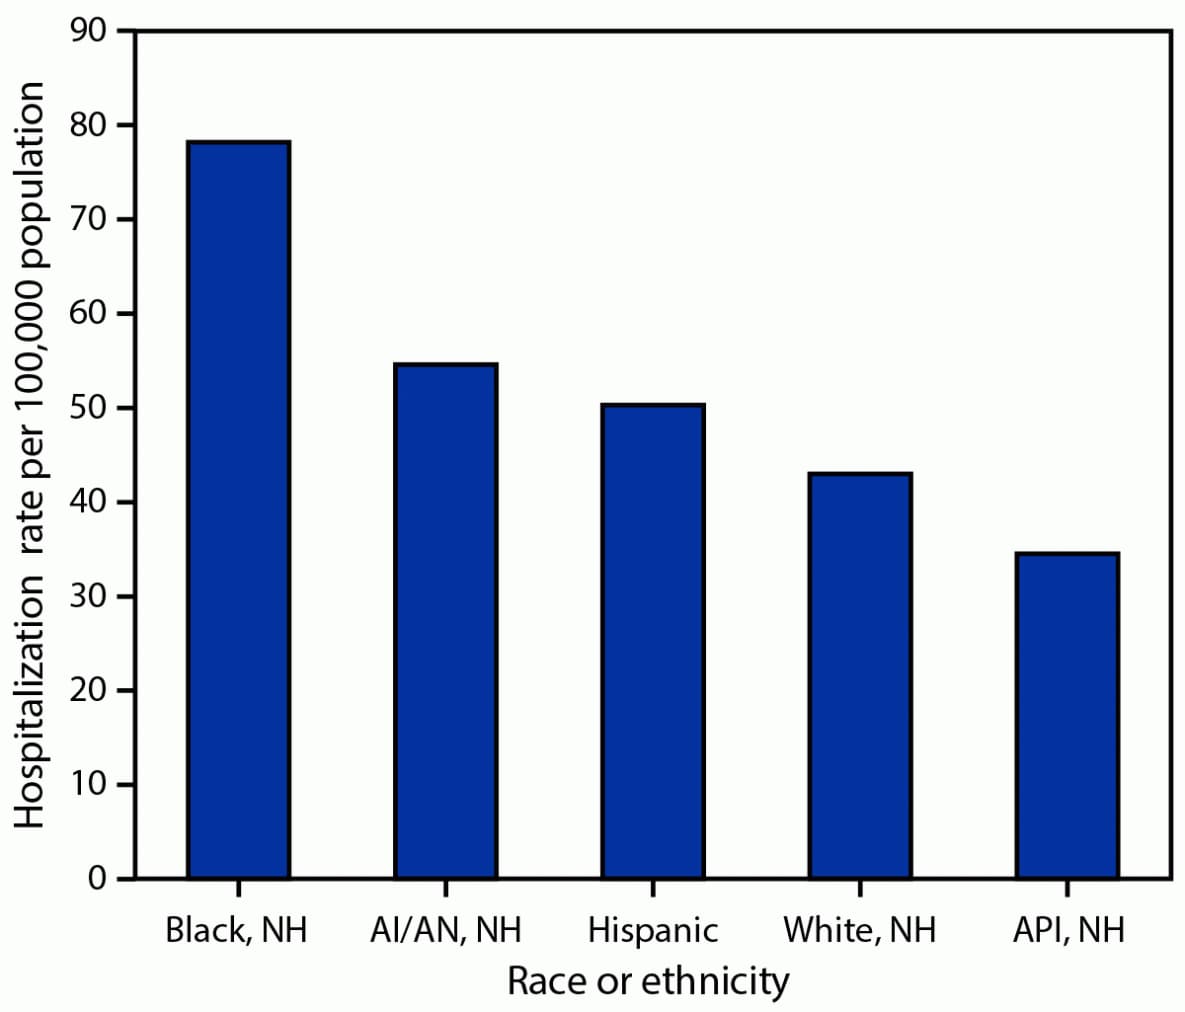 The figure consists of a bar graph indicating the age-adjusted Influenza-associated hospitalization rates among U.S. adults at least 18 years of age, by race and ethnicity, from 2009–10 through 2021–22, based on data from the Influenza-Associated Hospitalization Surveillance Network.